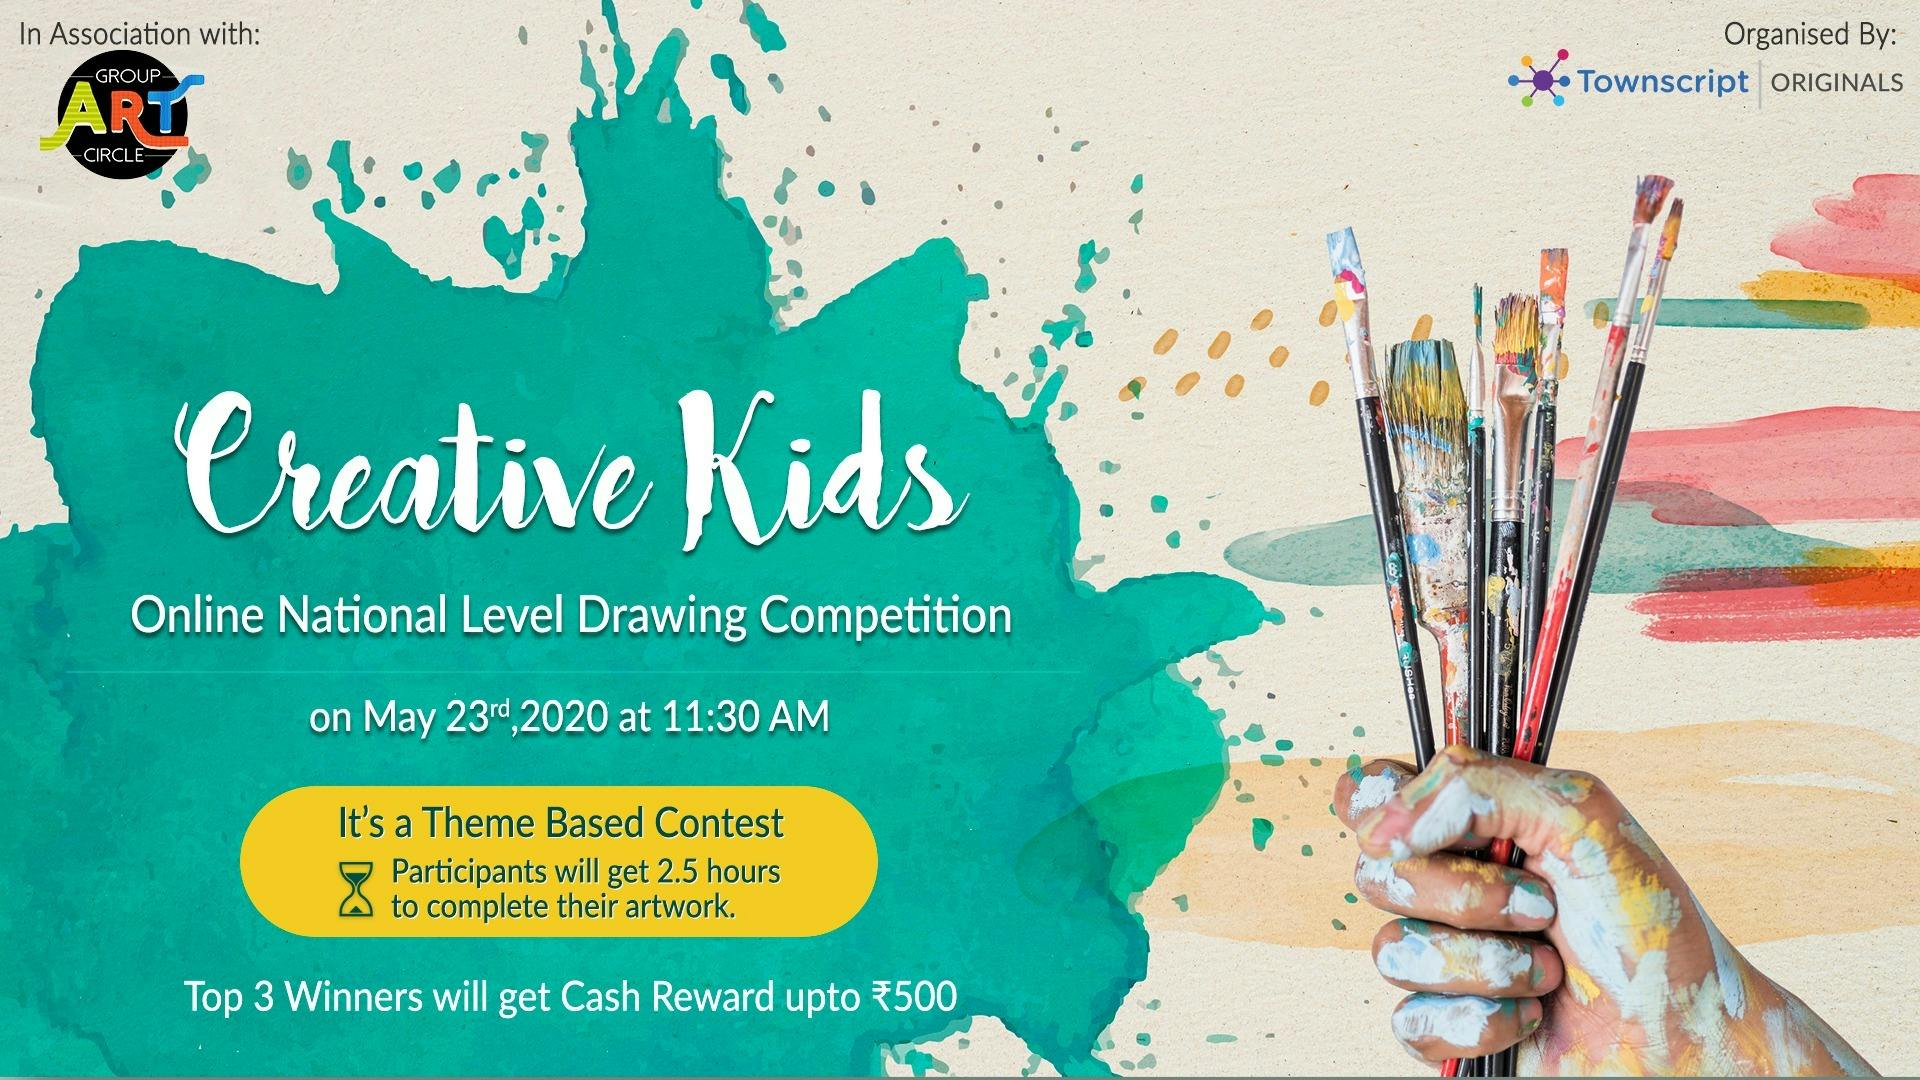 House of Art launches COVID-19 drawing contest for kids